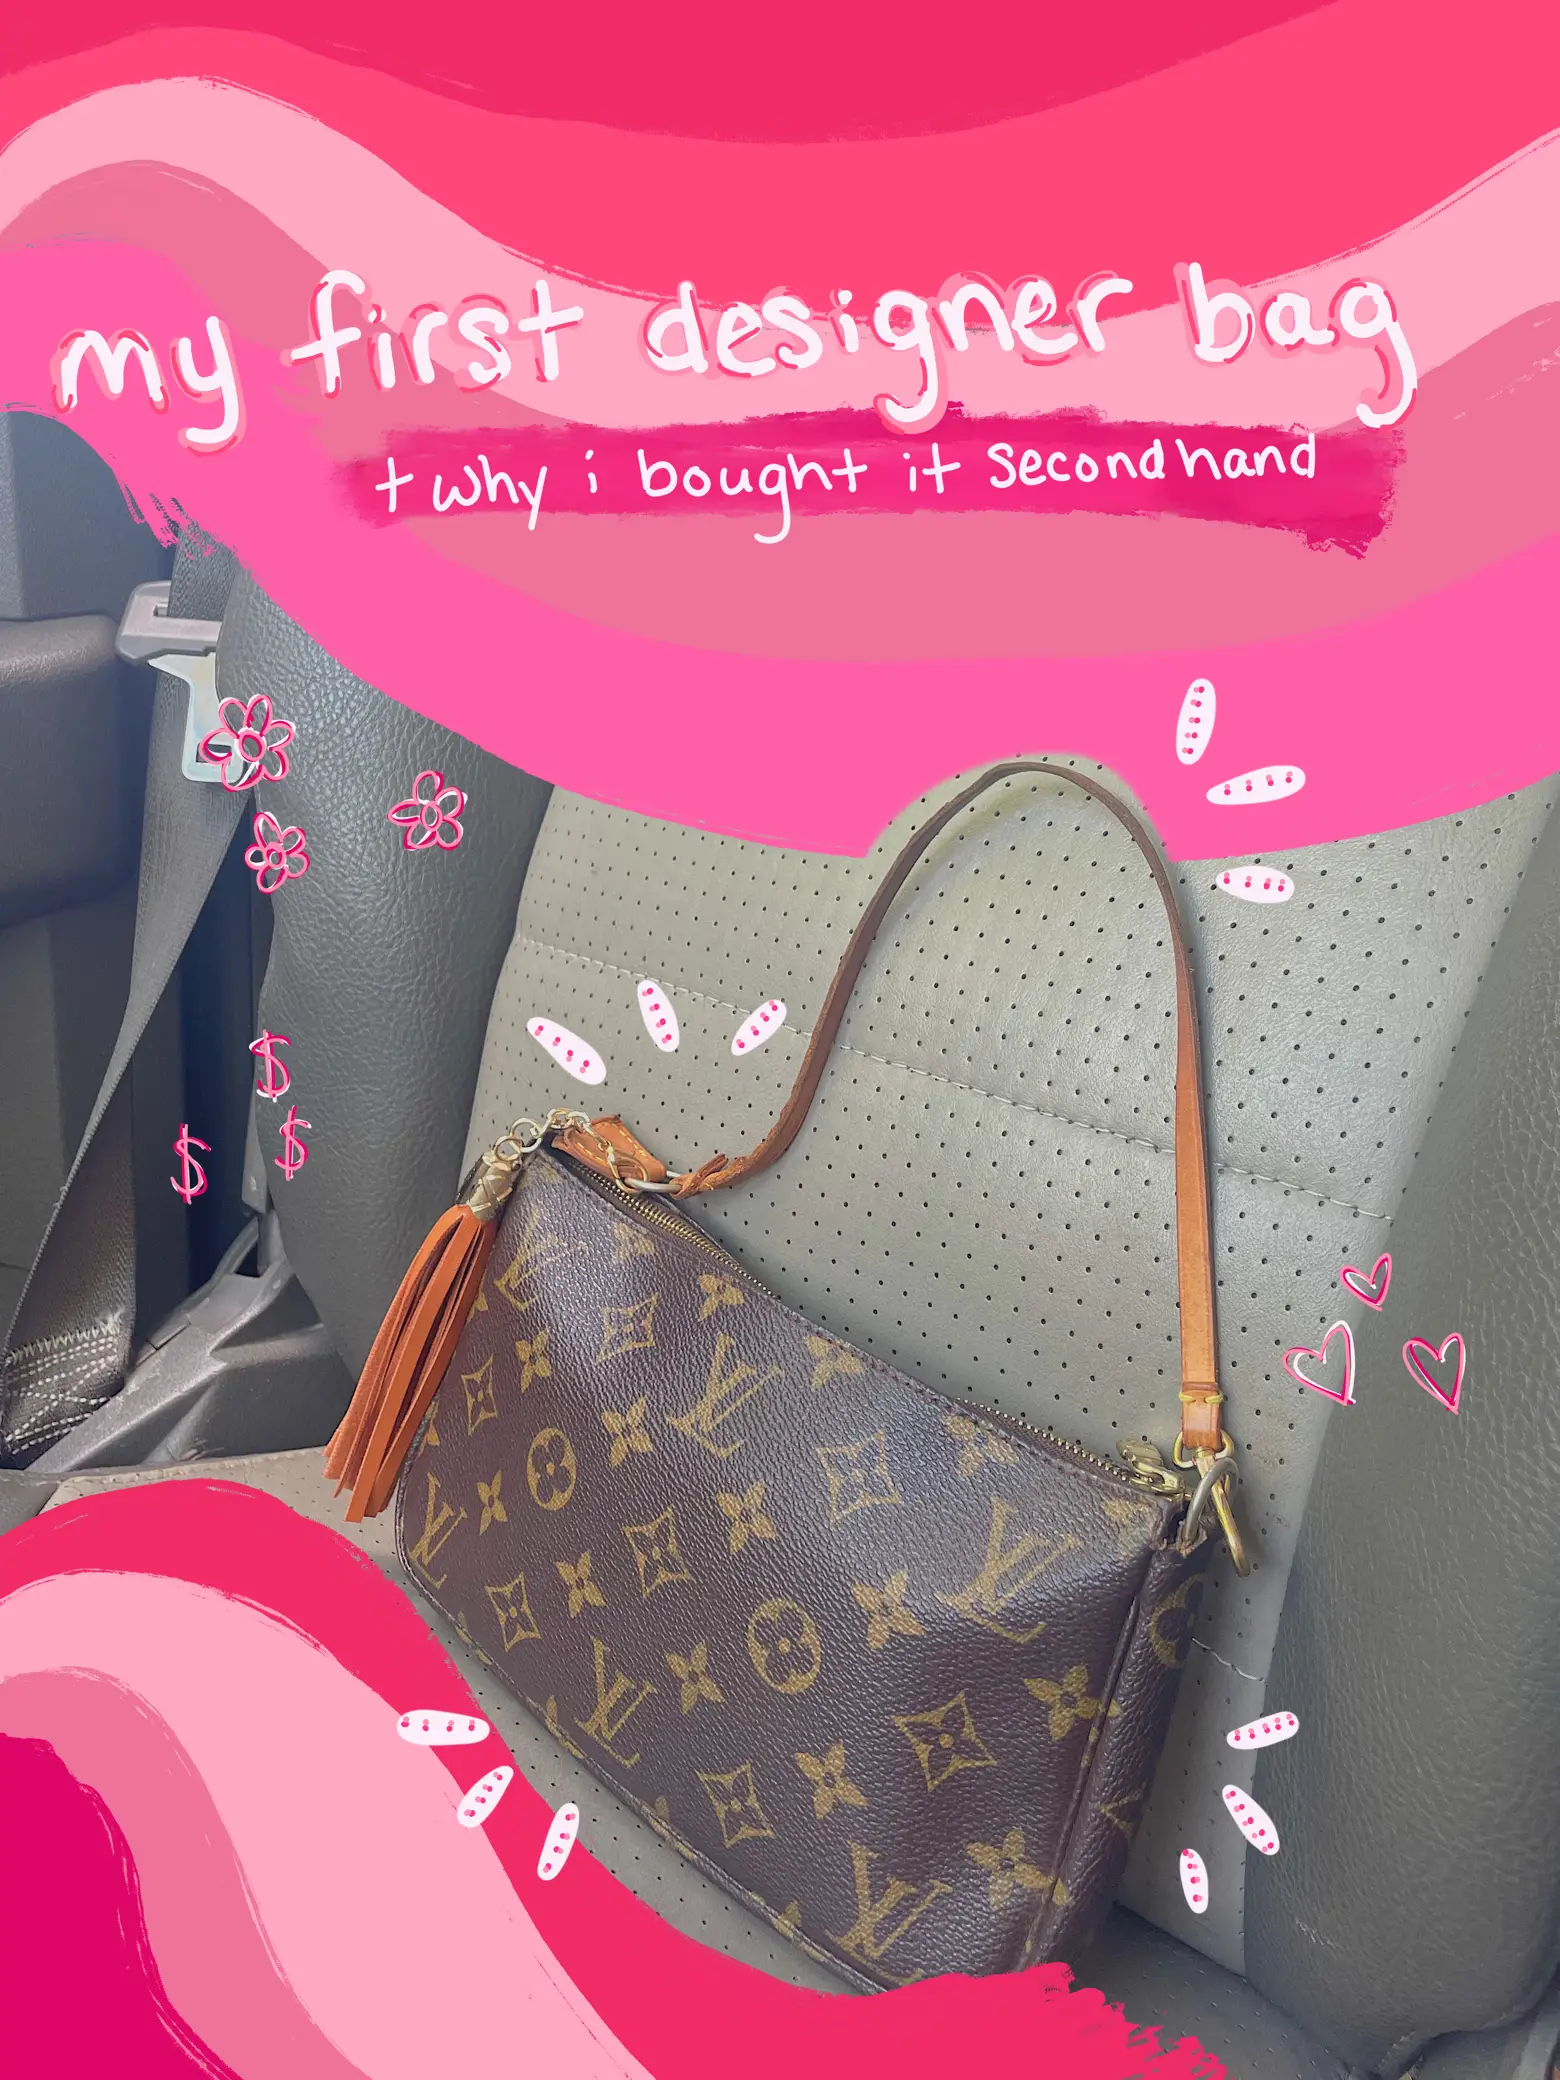 My favourite bag for when im on the go is this @louisvuitton